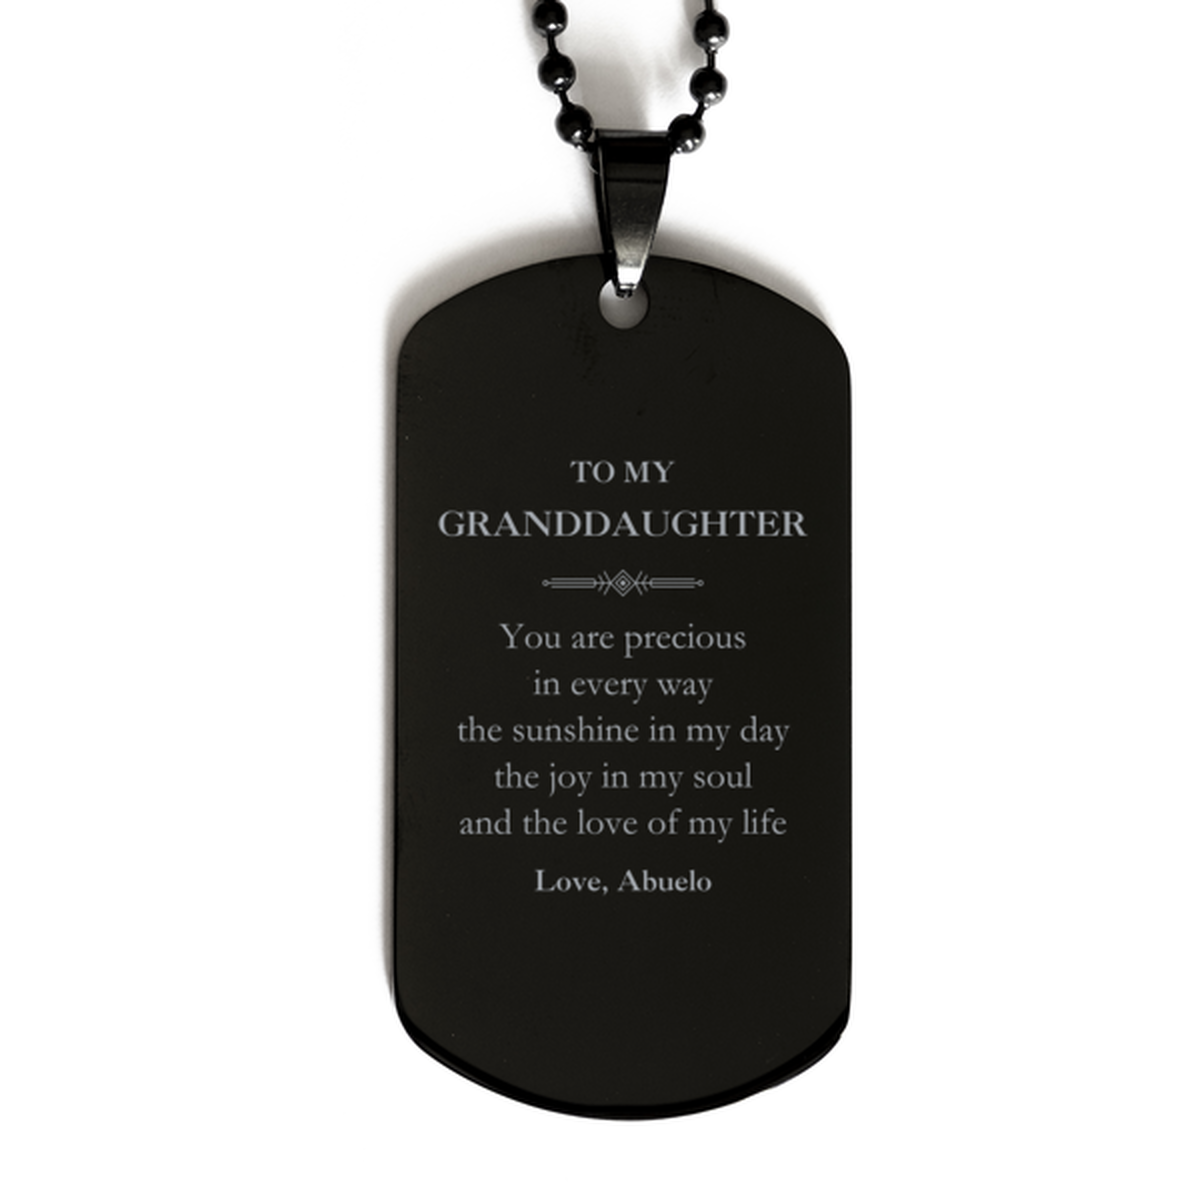 Graduation Gifts for Granddaughter Black Dog Tag Present from Abuelo, Christmas Granddaughter Birthday Gifts Granddaughter You are precious in every way the sunshine in my day. Love, Abuelo